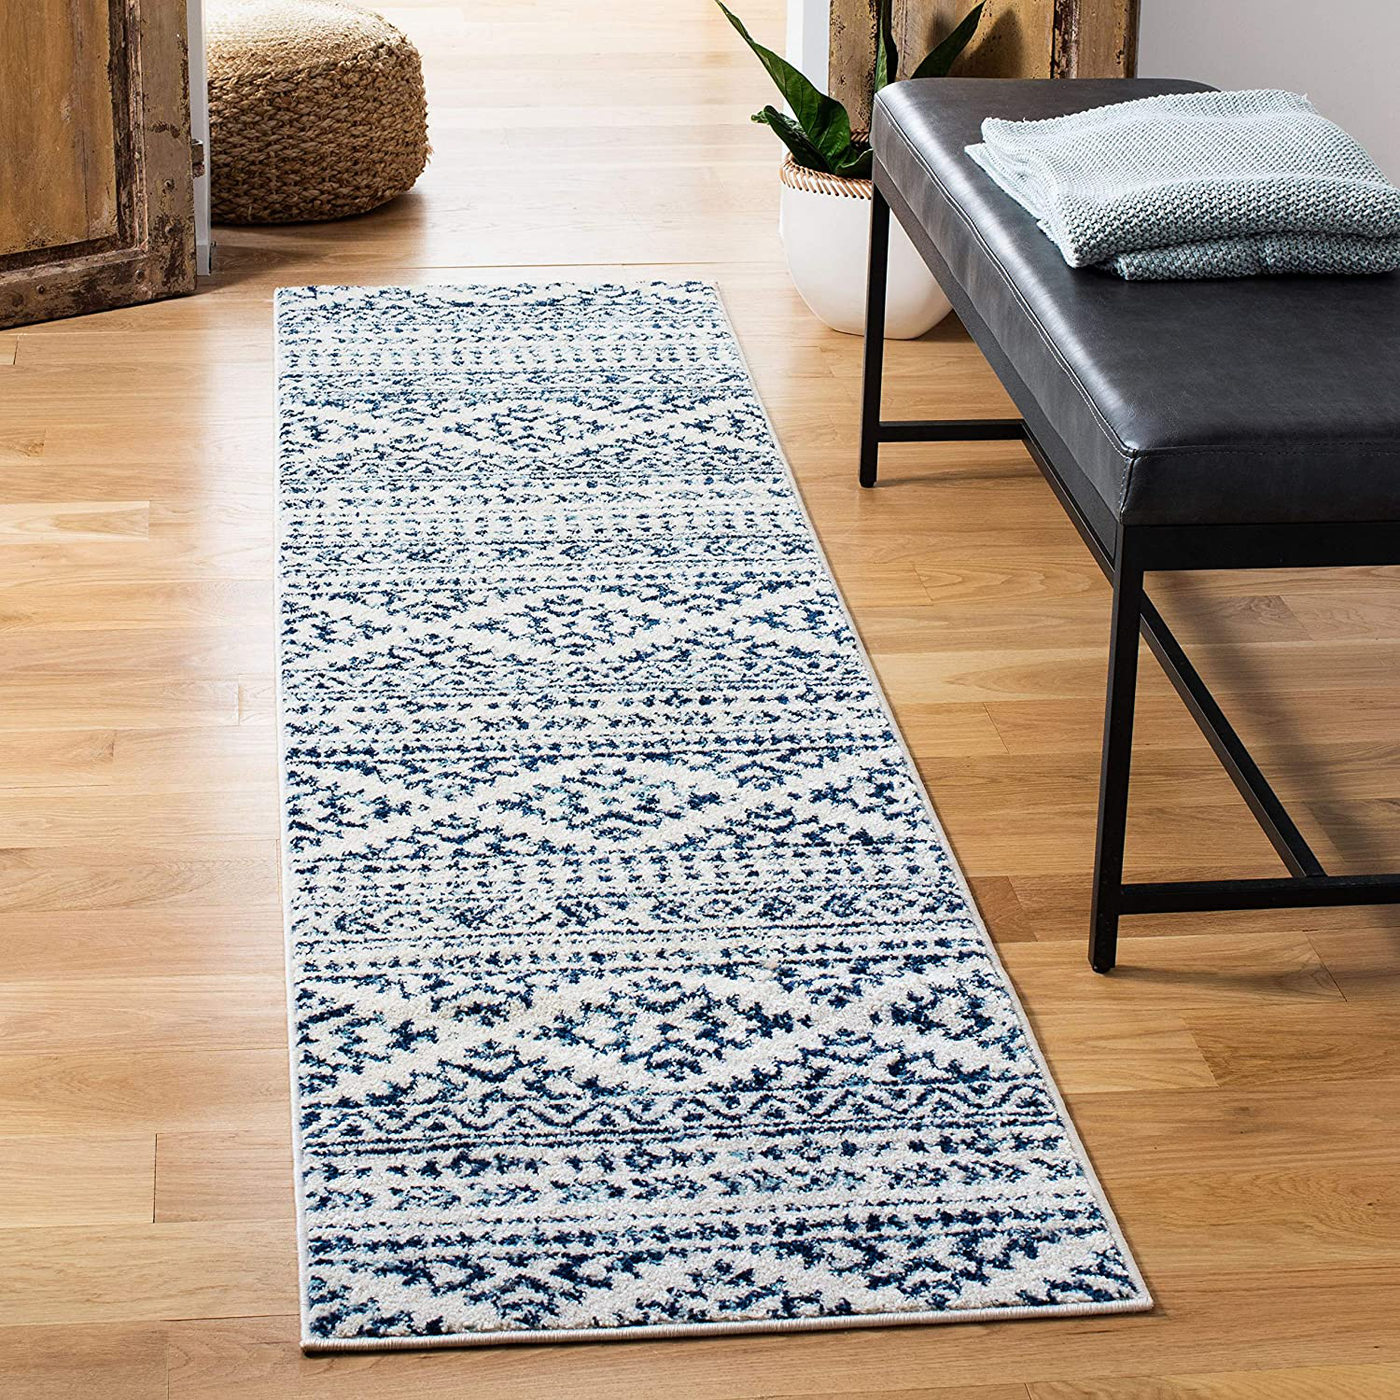 Safavieh Tulum Collection TUL272D Moroccan Boho Tribal Non-Shedding Stain Resistant Living Room Bedroom Runner, 2' x 19' , Ivory / Navy